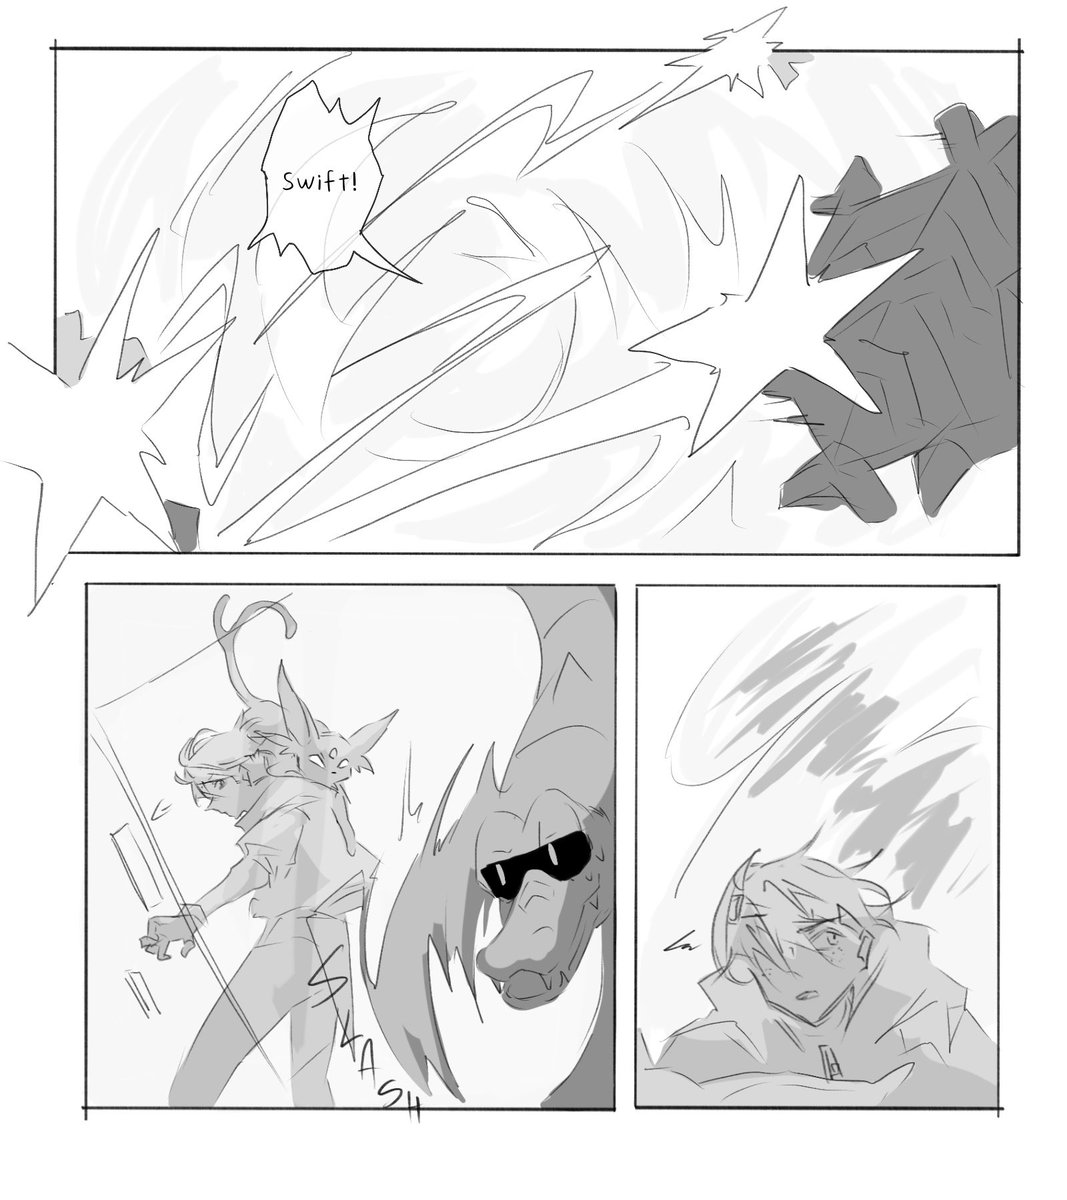 (1/2) Friendly Encounter [Pokemon AU]

I've always wanted to draw a Pokémon battle ever since I read the manga, idk how I did but it was fun. 

Maybe I'll draw Niki, Wilbur or another cc in a contest since I loved how they worked in the anime, maybe 

#RIVALSTWT #mcytfanart 